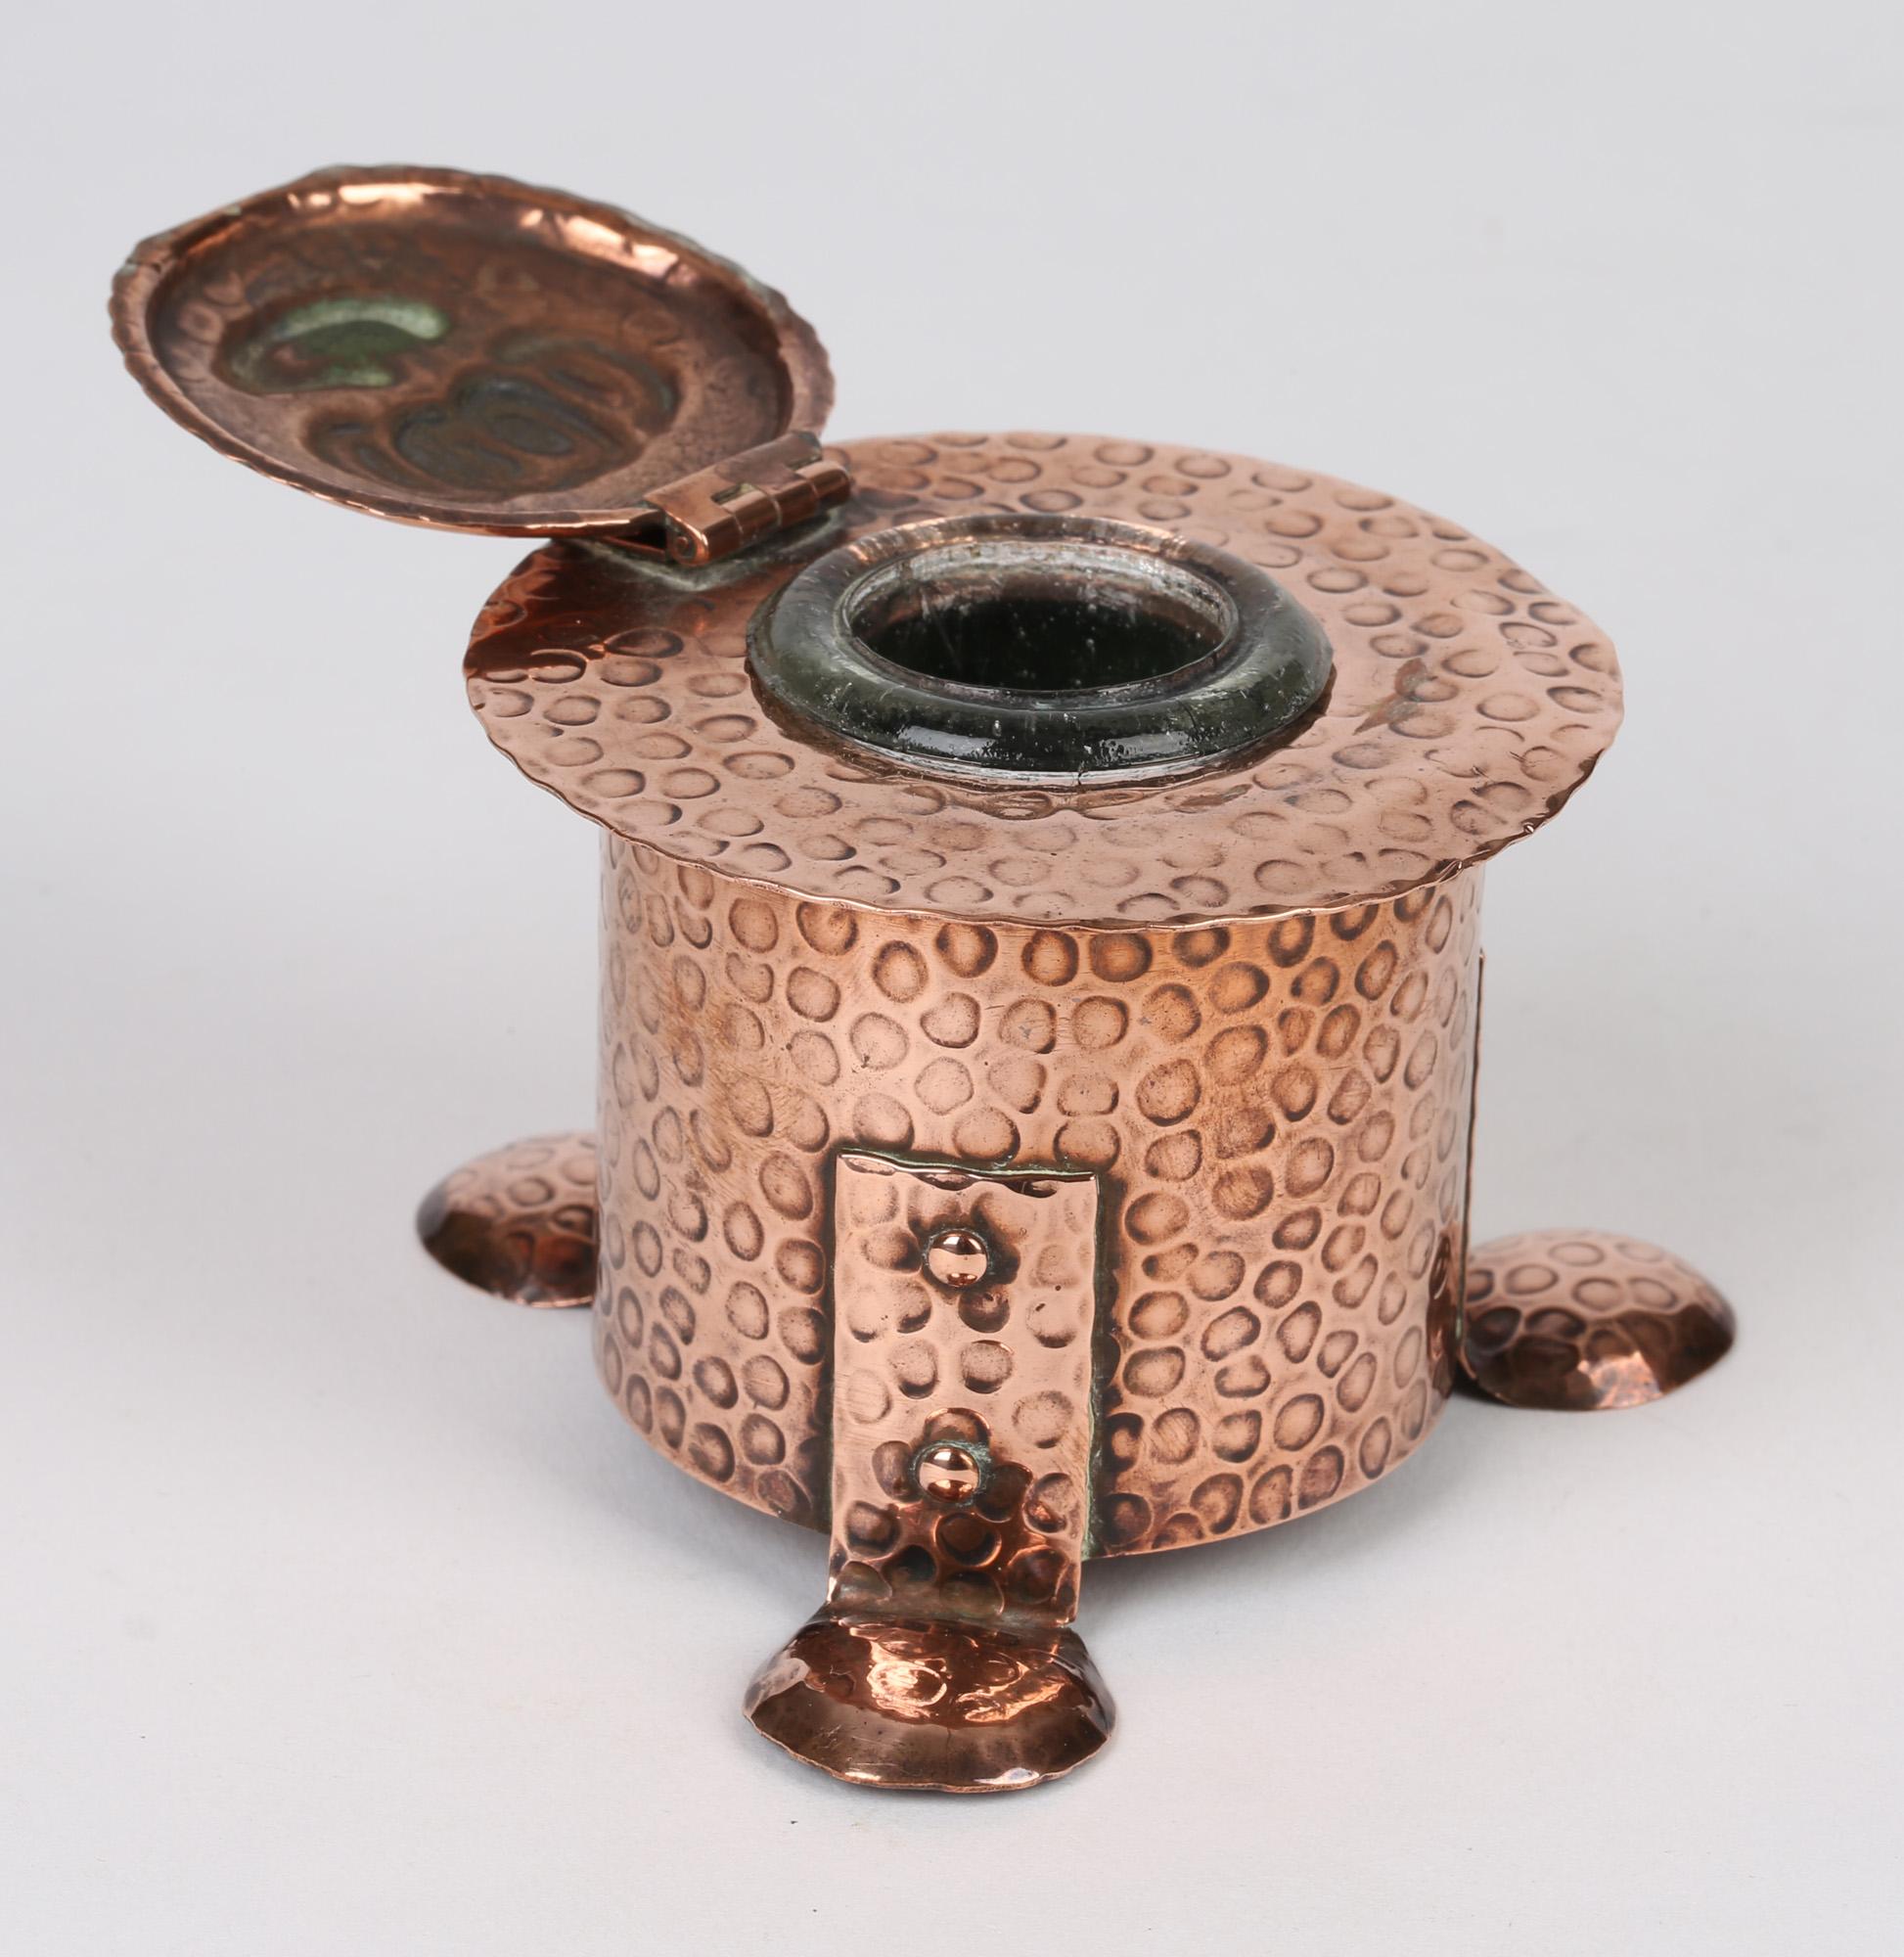 A very stylish Arts & Crafts hand-beaten lidded copper inkwell by J F Poole Hayle dating from around 1895. Made in Cornwall the inkwell is of rounded cylindrical shape and stands raised on three folded flat rounded and domed feet riveted to the